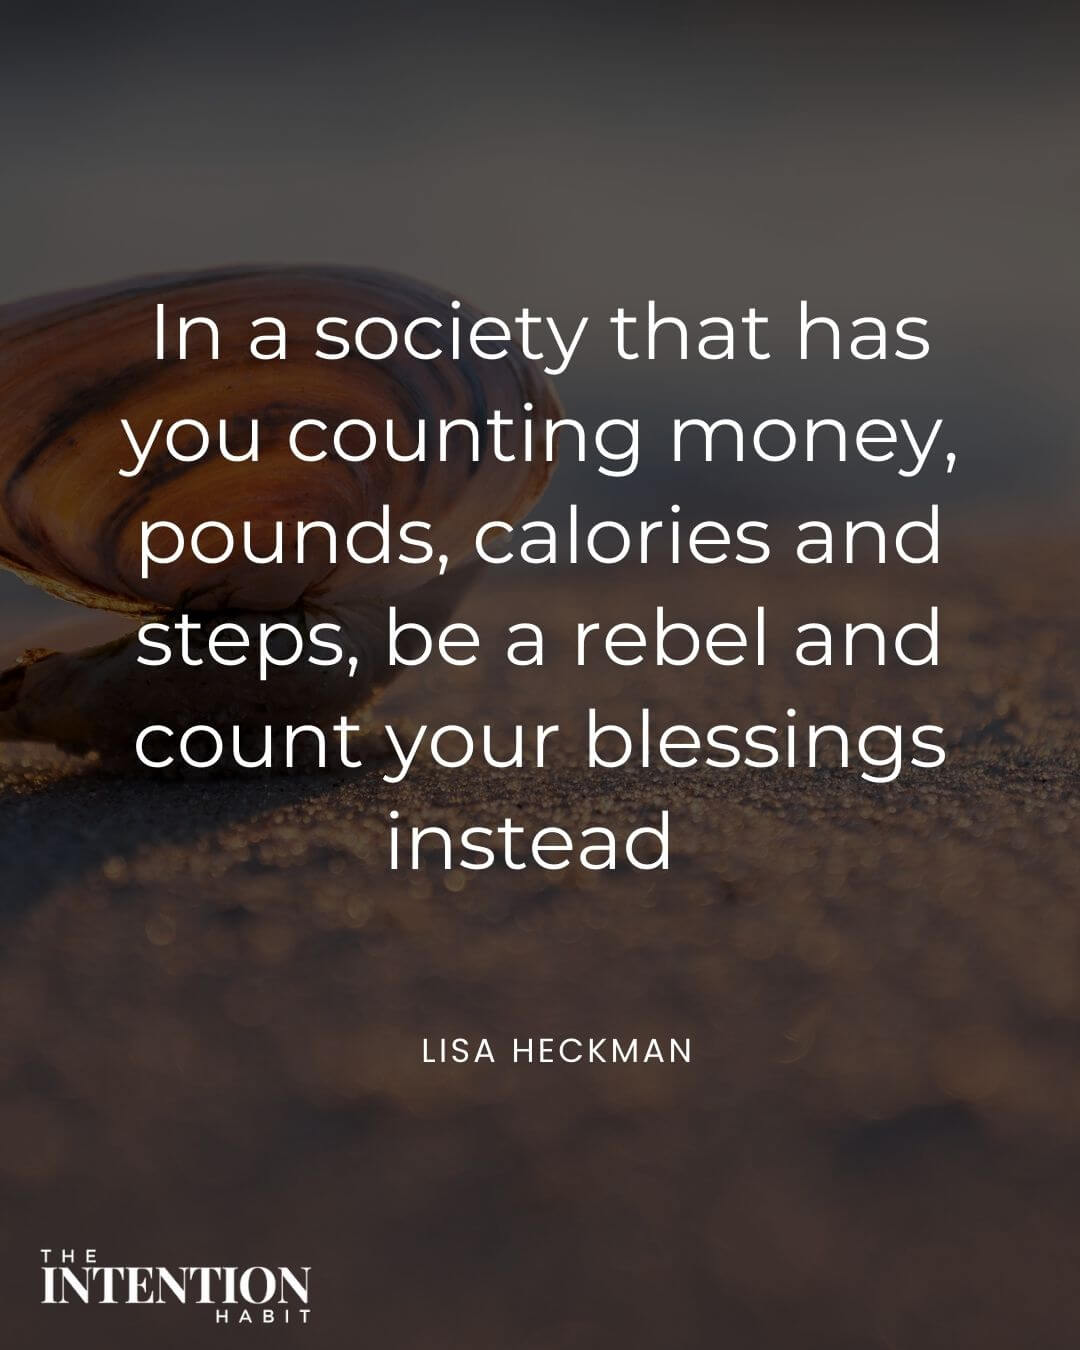 Intentional living quote - in a society that has you counting money, poounds, calories and steps, be a rebel and count your blessings instead